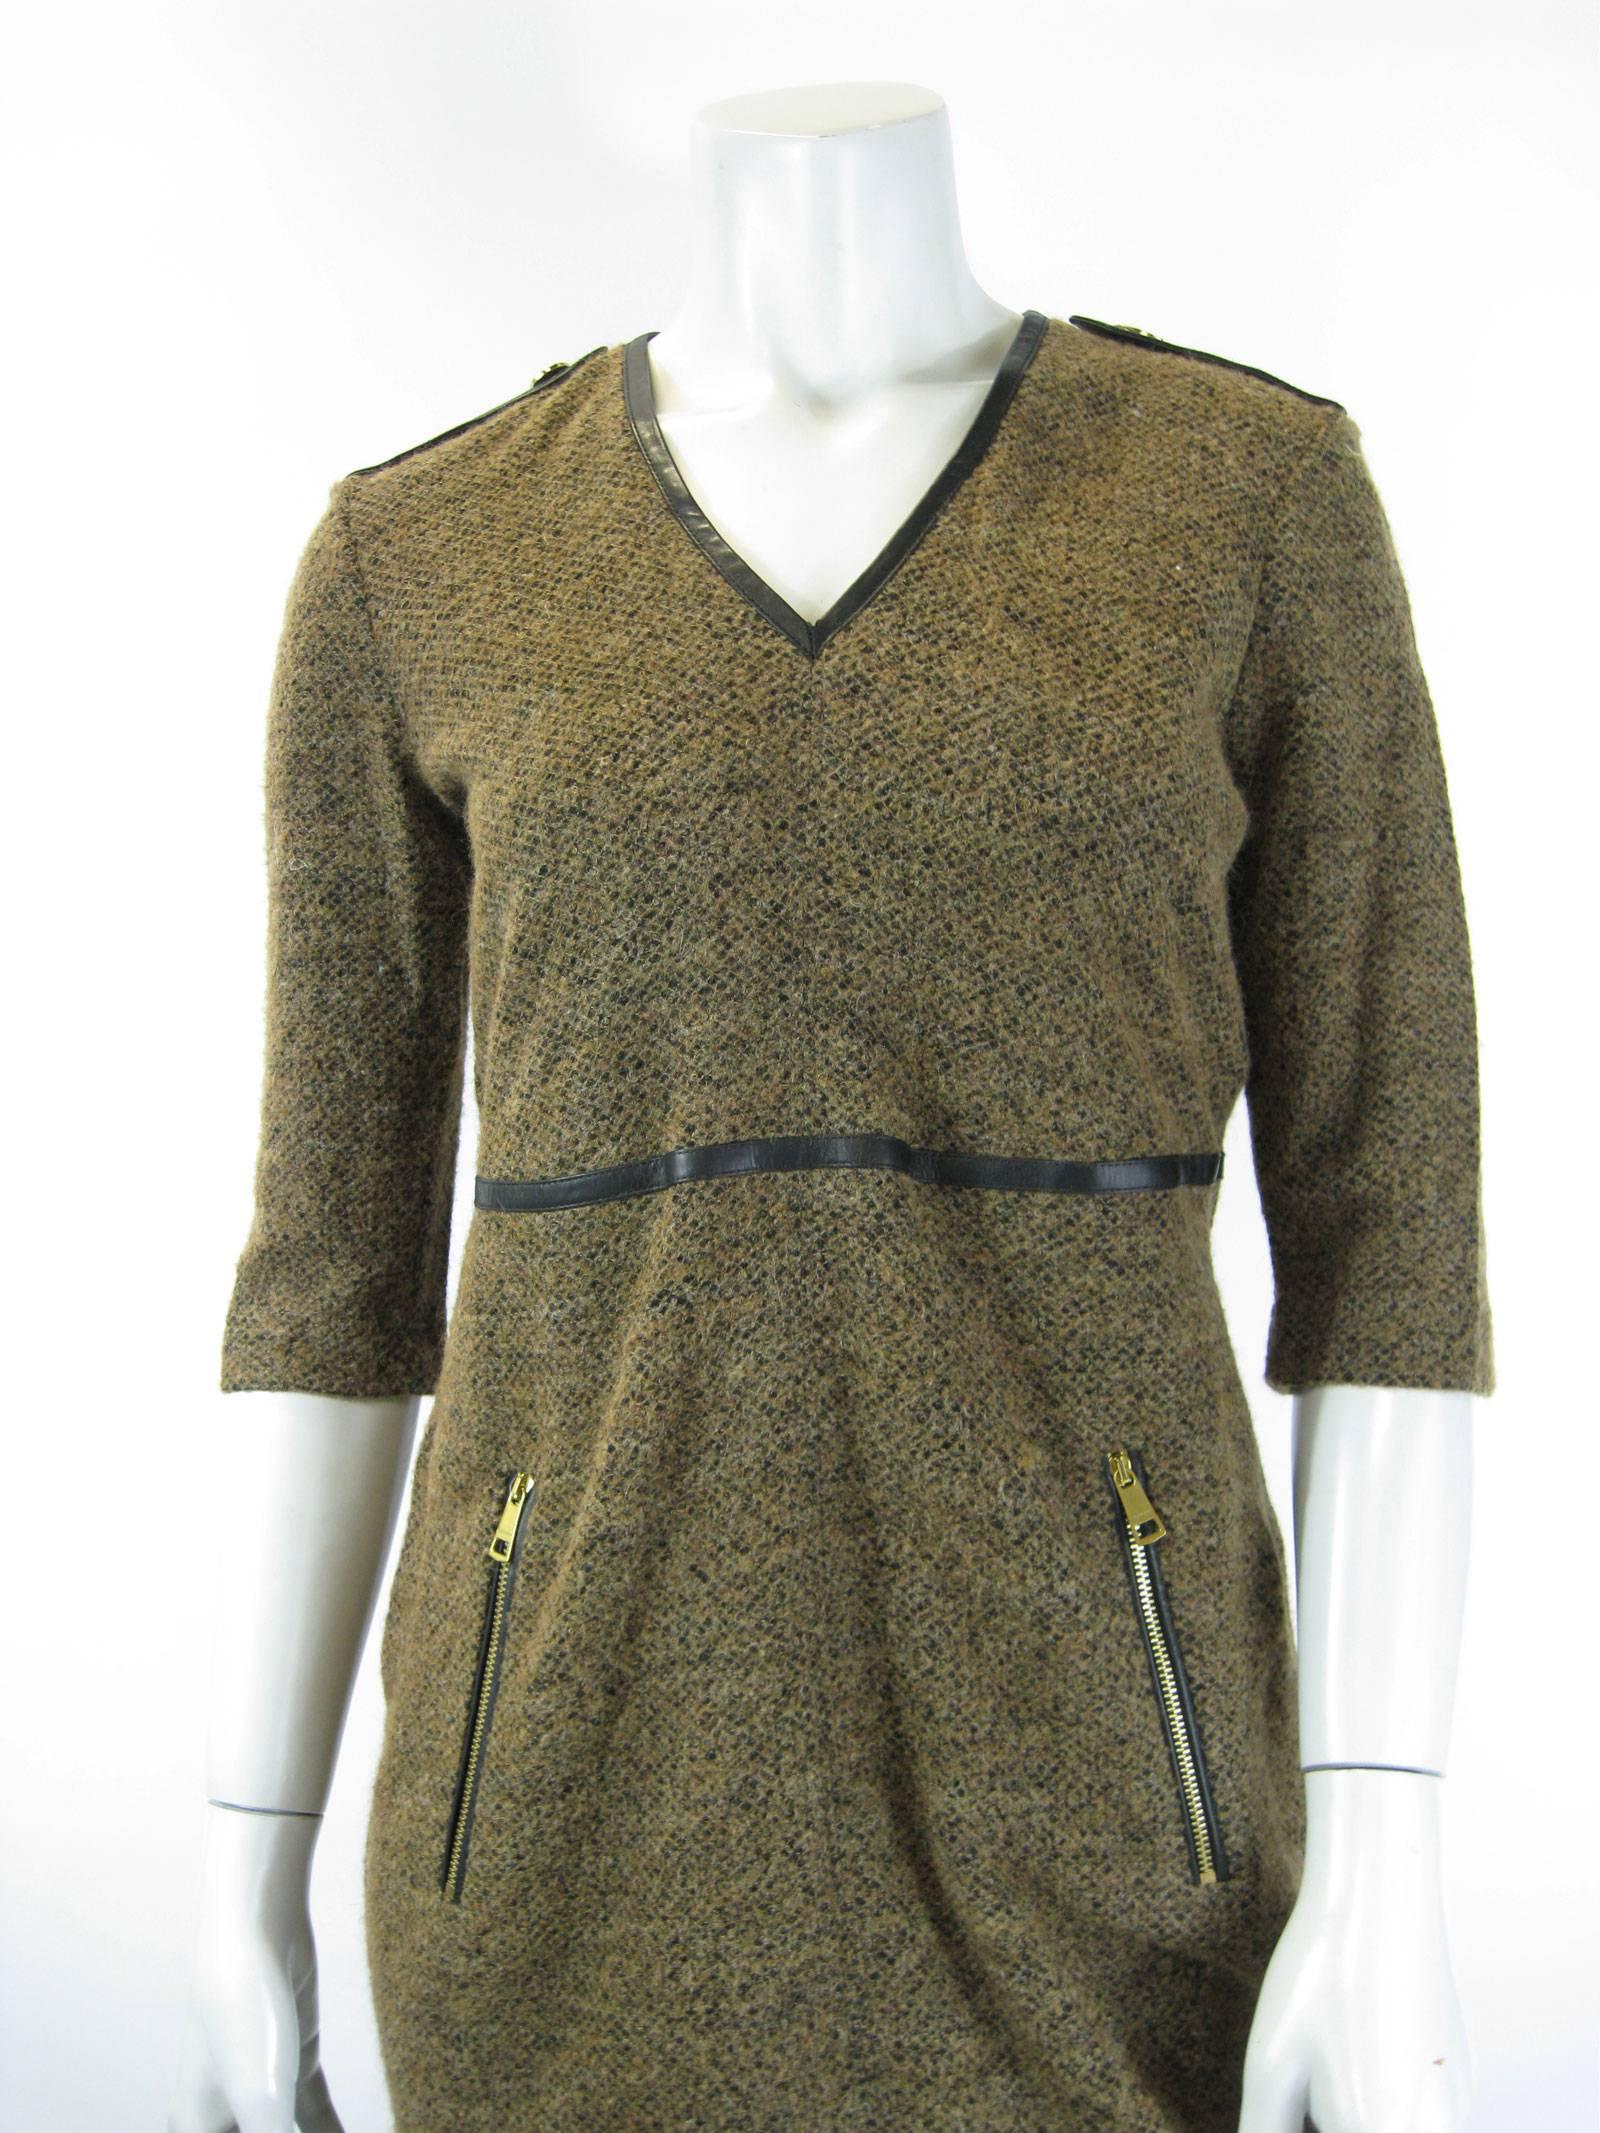 Classic Burberry Brit dress.
Woven brown and black blended fuzzy knit.
Leather details at neck, waist and shoulder amulets.
Gold zippers and button details.
Pockets.
No lining.
Tagged a size US 8.

Bust: 36